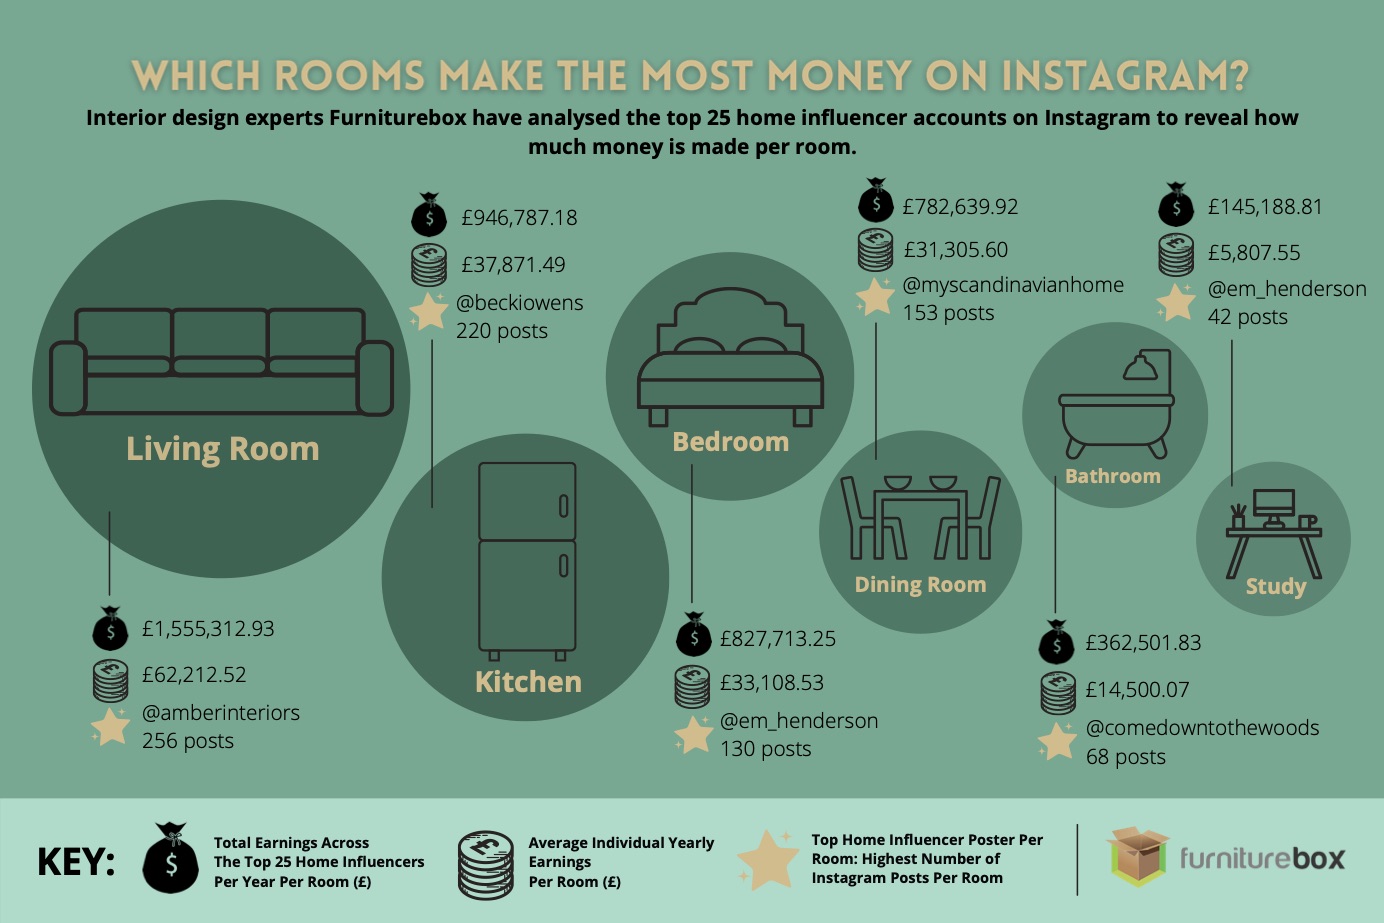 An infographic to show which room makes the most money on Instagram following a review of 25 top interior design Instagram influencers.